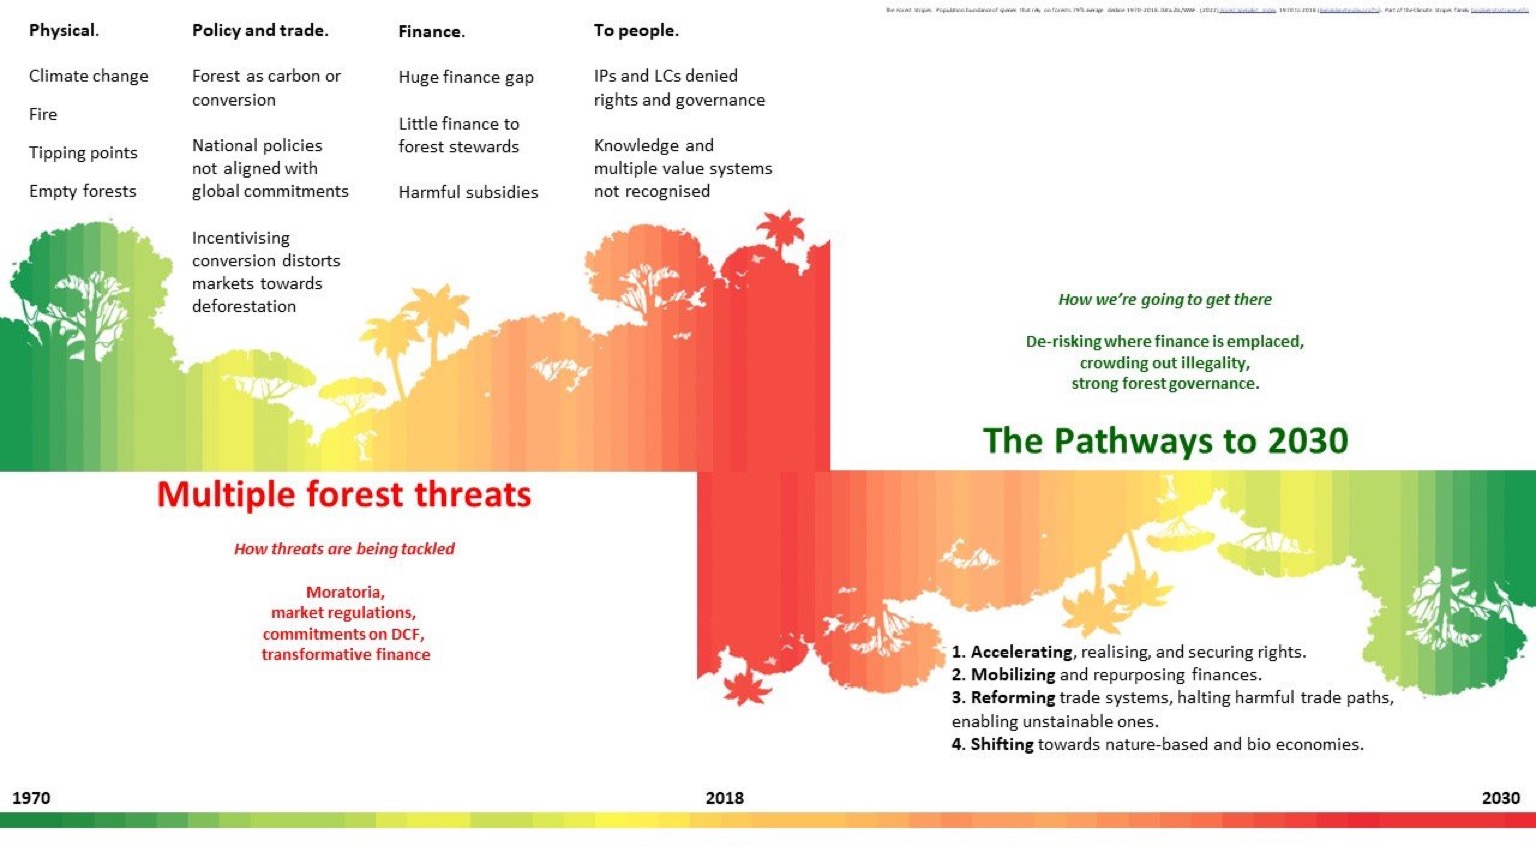 The Pathways infographic summarizes, on the left, the multiple threats to meeting global forest commitments and how positive momentum is building. On the right, the pathways to meeting global forest goals are laid out and what progress is needed to move along the pathways to protect, restore and sustainably manage forests globally. Image courtesy of WWF.